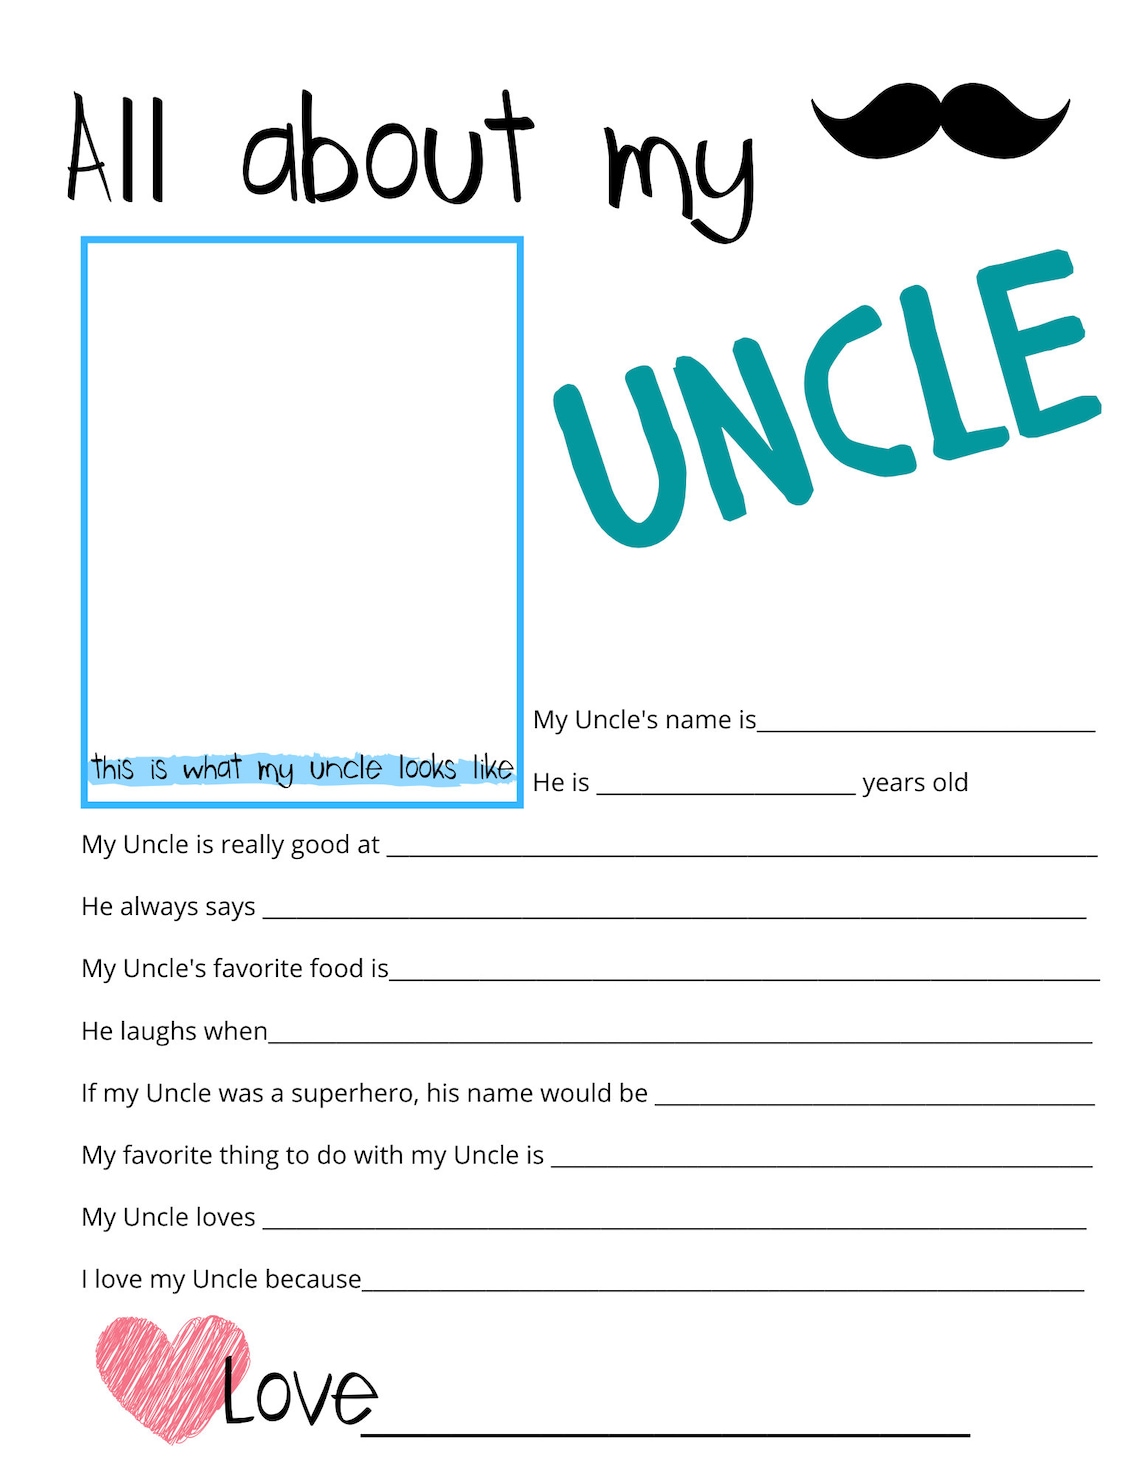 all-about-my-uncle-questionnaire-printable-survey-fill-etsy